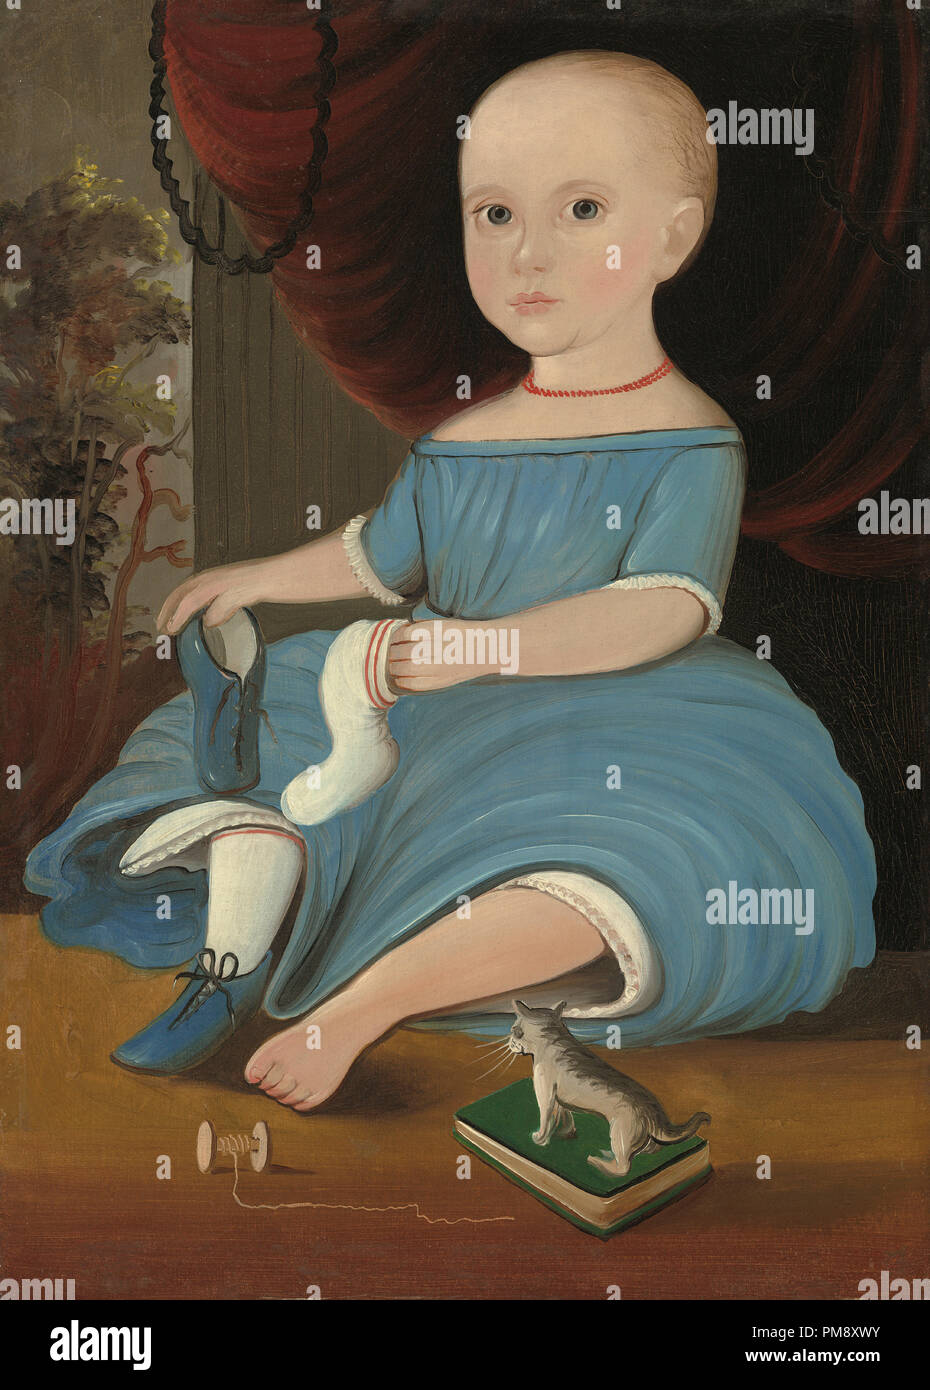 Baby in Blue. Dated: c. 1845. Dimensions: painted surface: 60.3 x 43.2 cm (23 3/4 x 17 in.)  support: 60.6 x 43.7 cm (23 7/8 x 17 3/16 in.)  framed: 74.6 x 57.5 x 3.2 cm (29 3/8 x 22 5/8 x 1 1/4 in.). Medium: oil on paper on wood. Museum: National Gallery of Art, Washington DC. Author: William Matthew Prior. Stock Photo